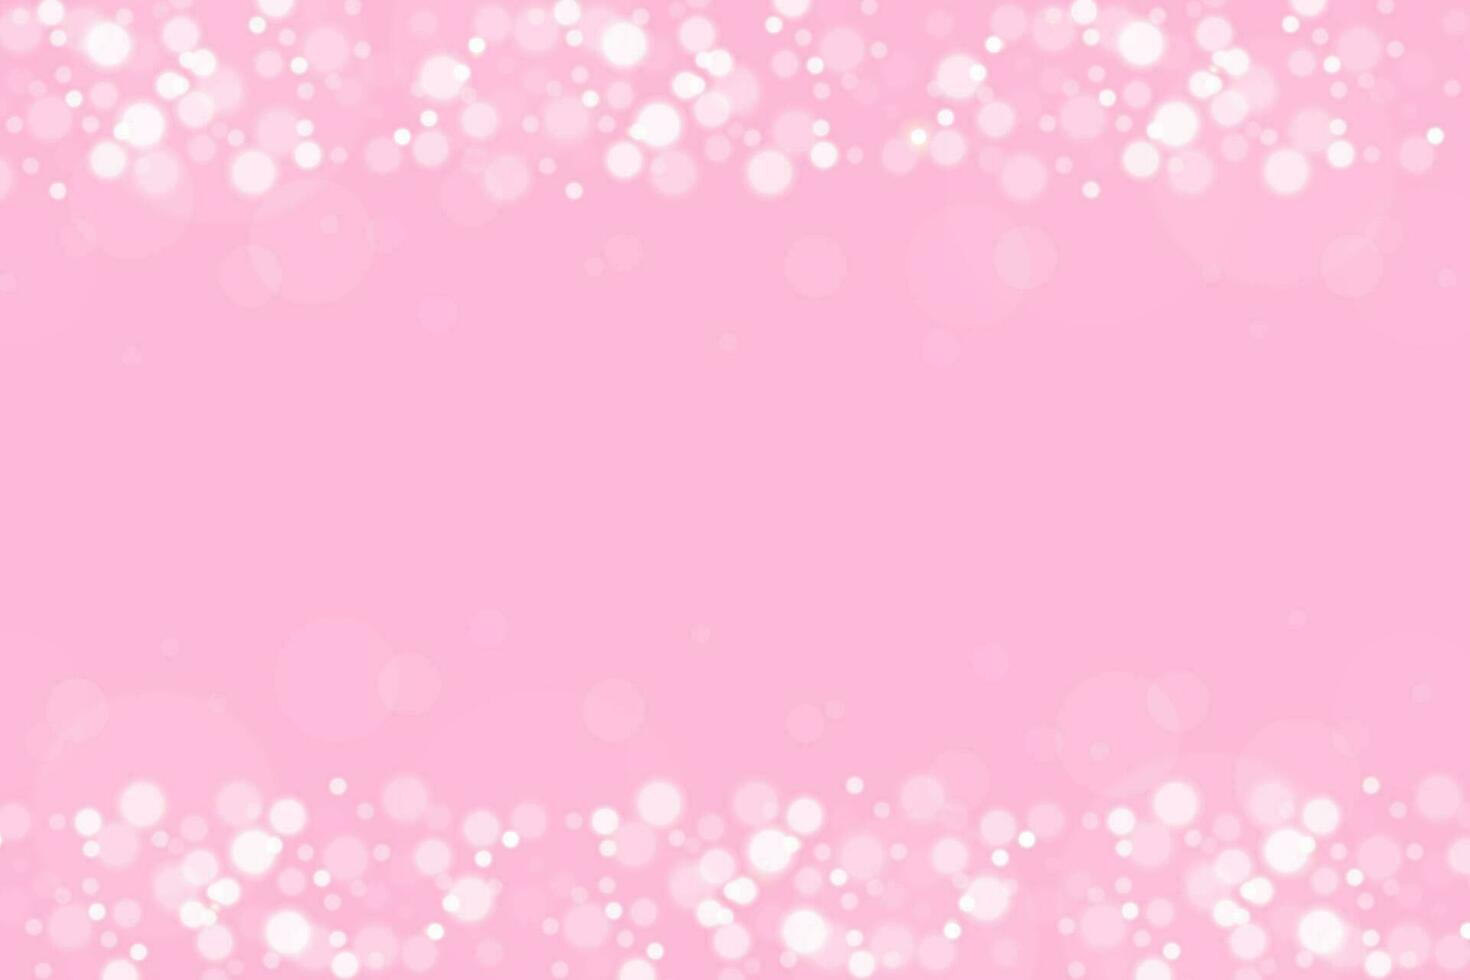 Gentle pink background with glowing bokeh. Luminous particles fall from above. Vector template for girly holiday designs